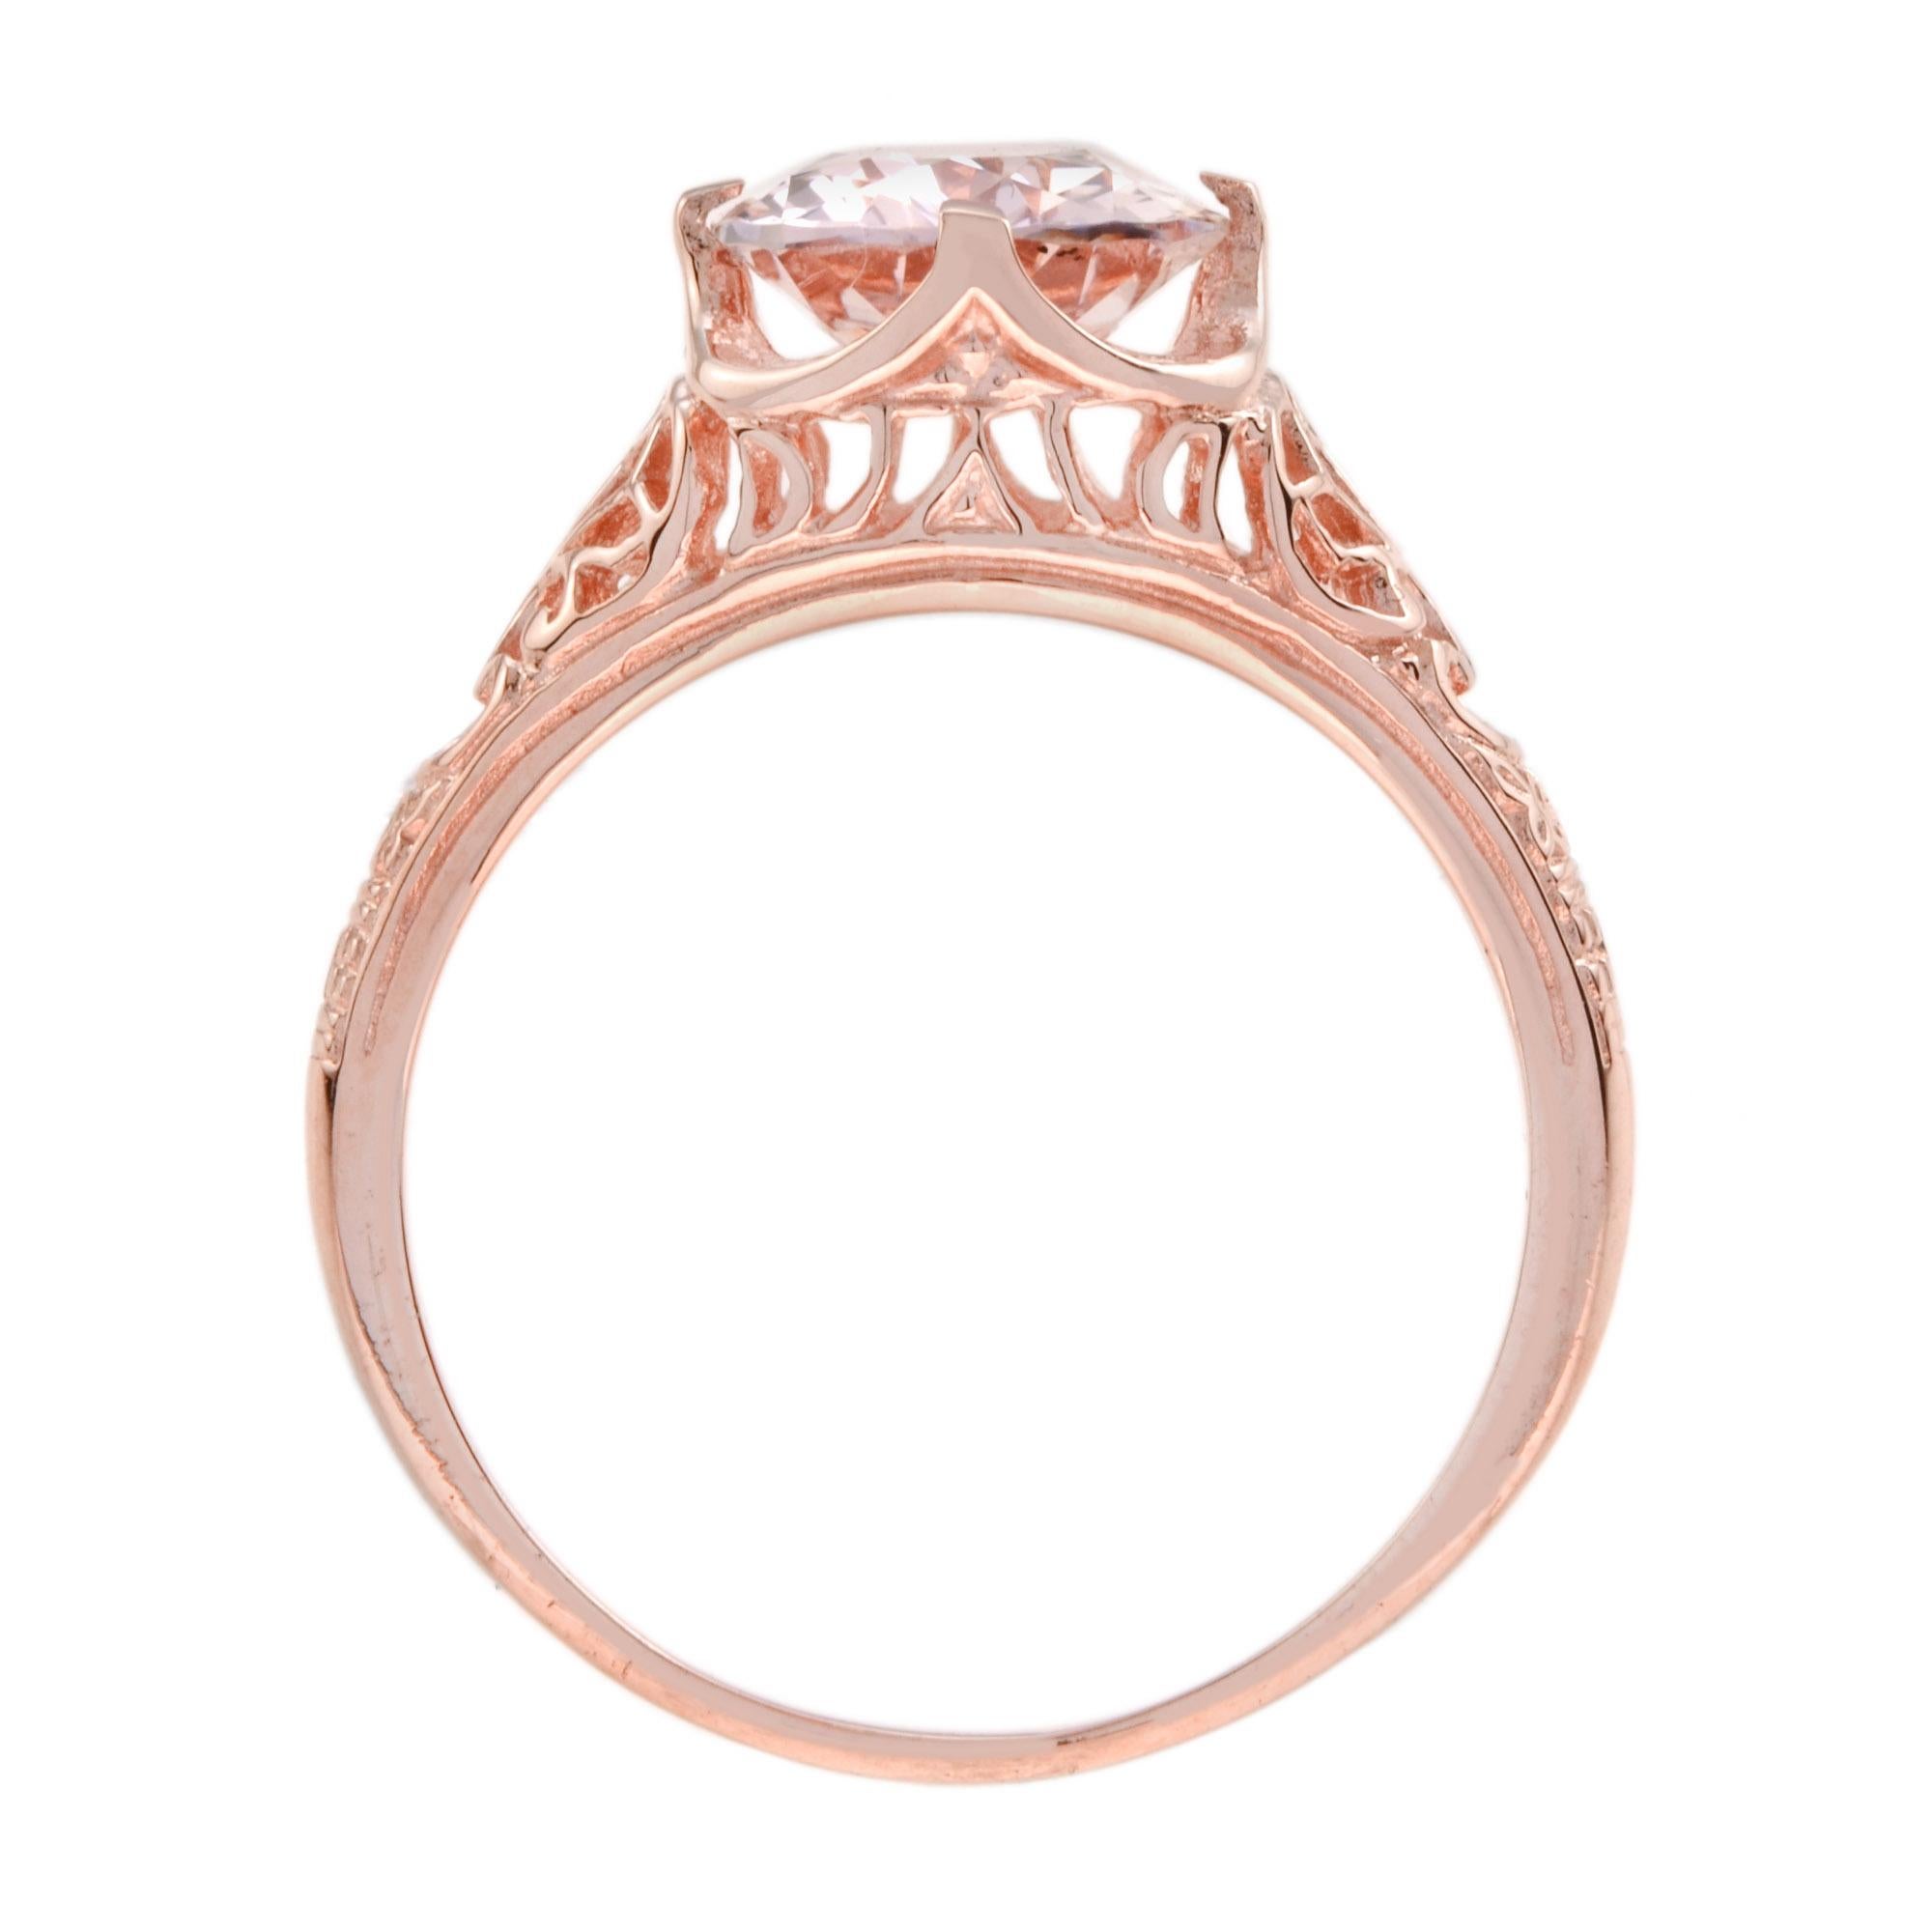 Oval Cut Oval Shaped Morganite Vintage Style Filigree Engagement Ring in 9k Rose Gold For Sale